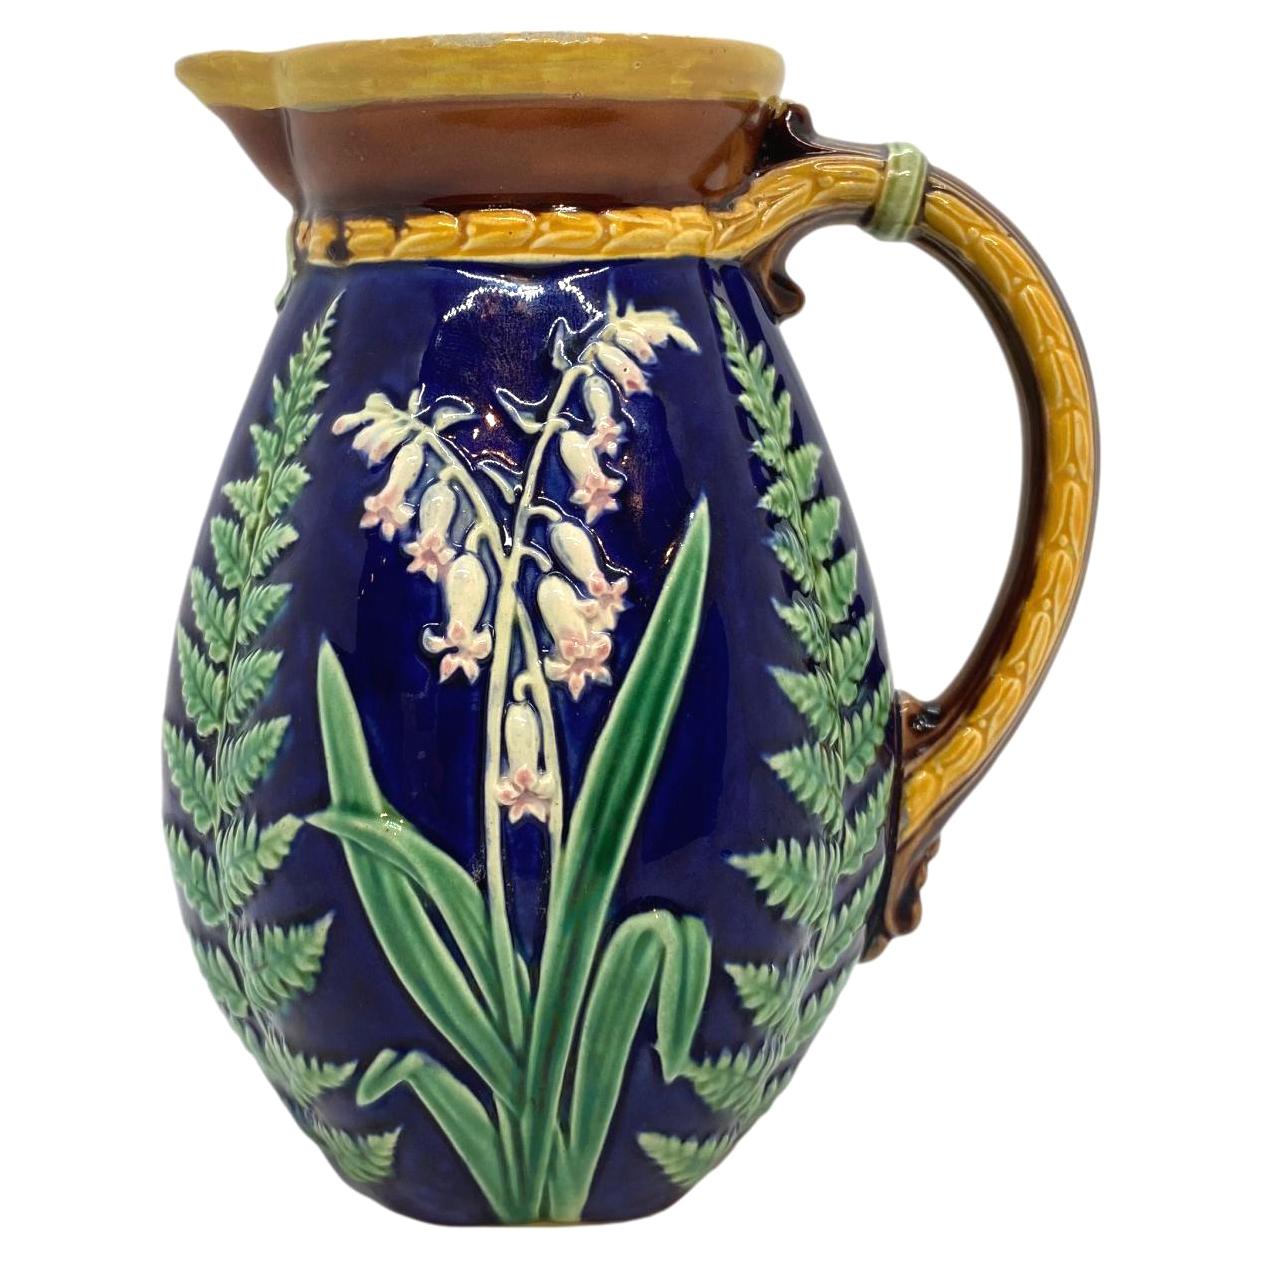 Brown-Westhead Moore Majolica Pitcher Lilies of the Valley and Ferns on Cobalt